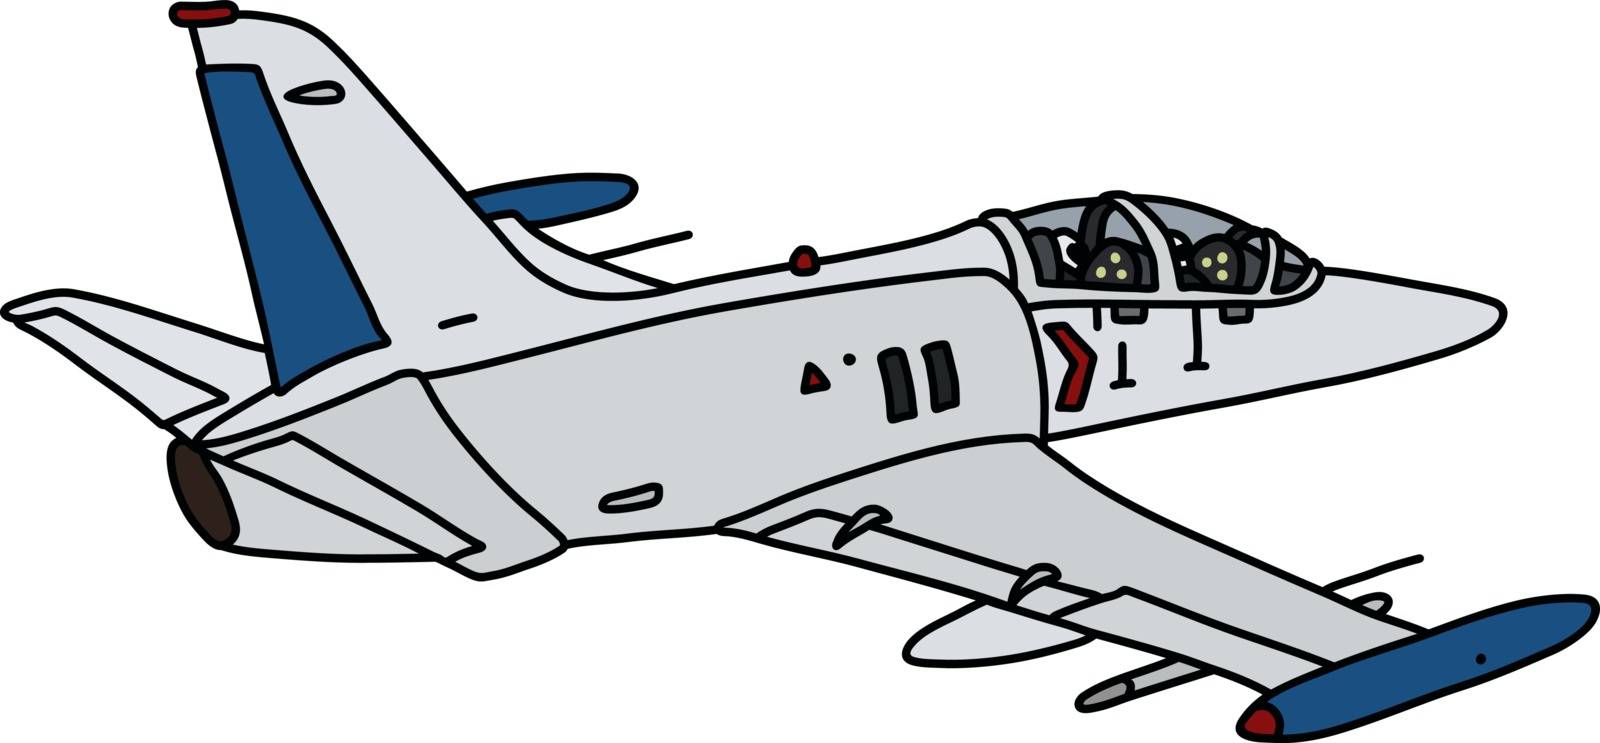 The white military jet by vostal